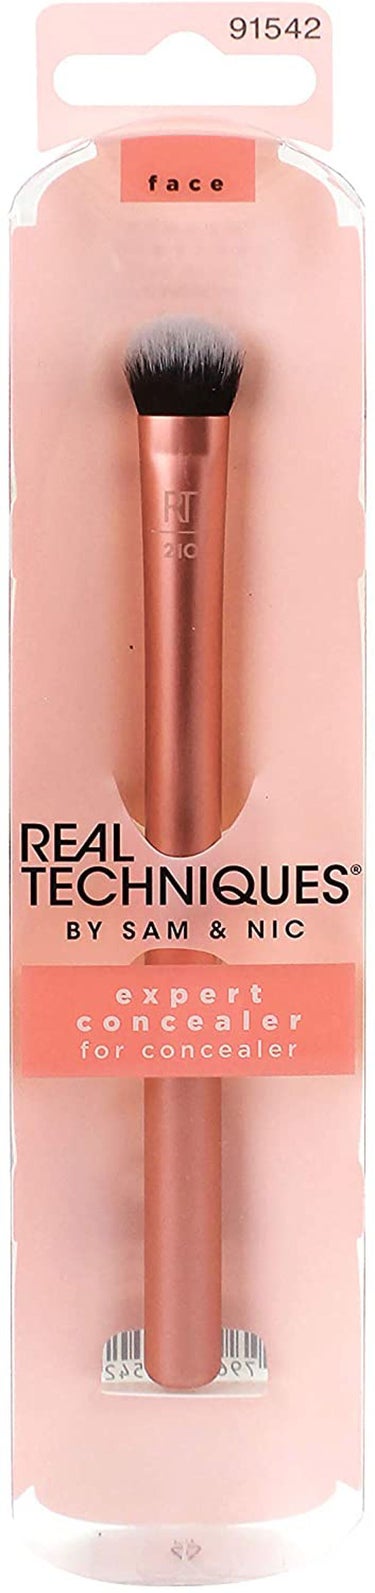 Real Techniques expert concealer brush